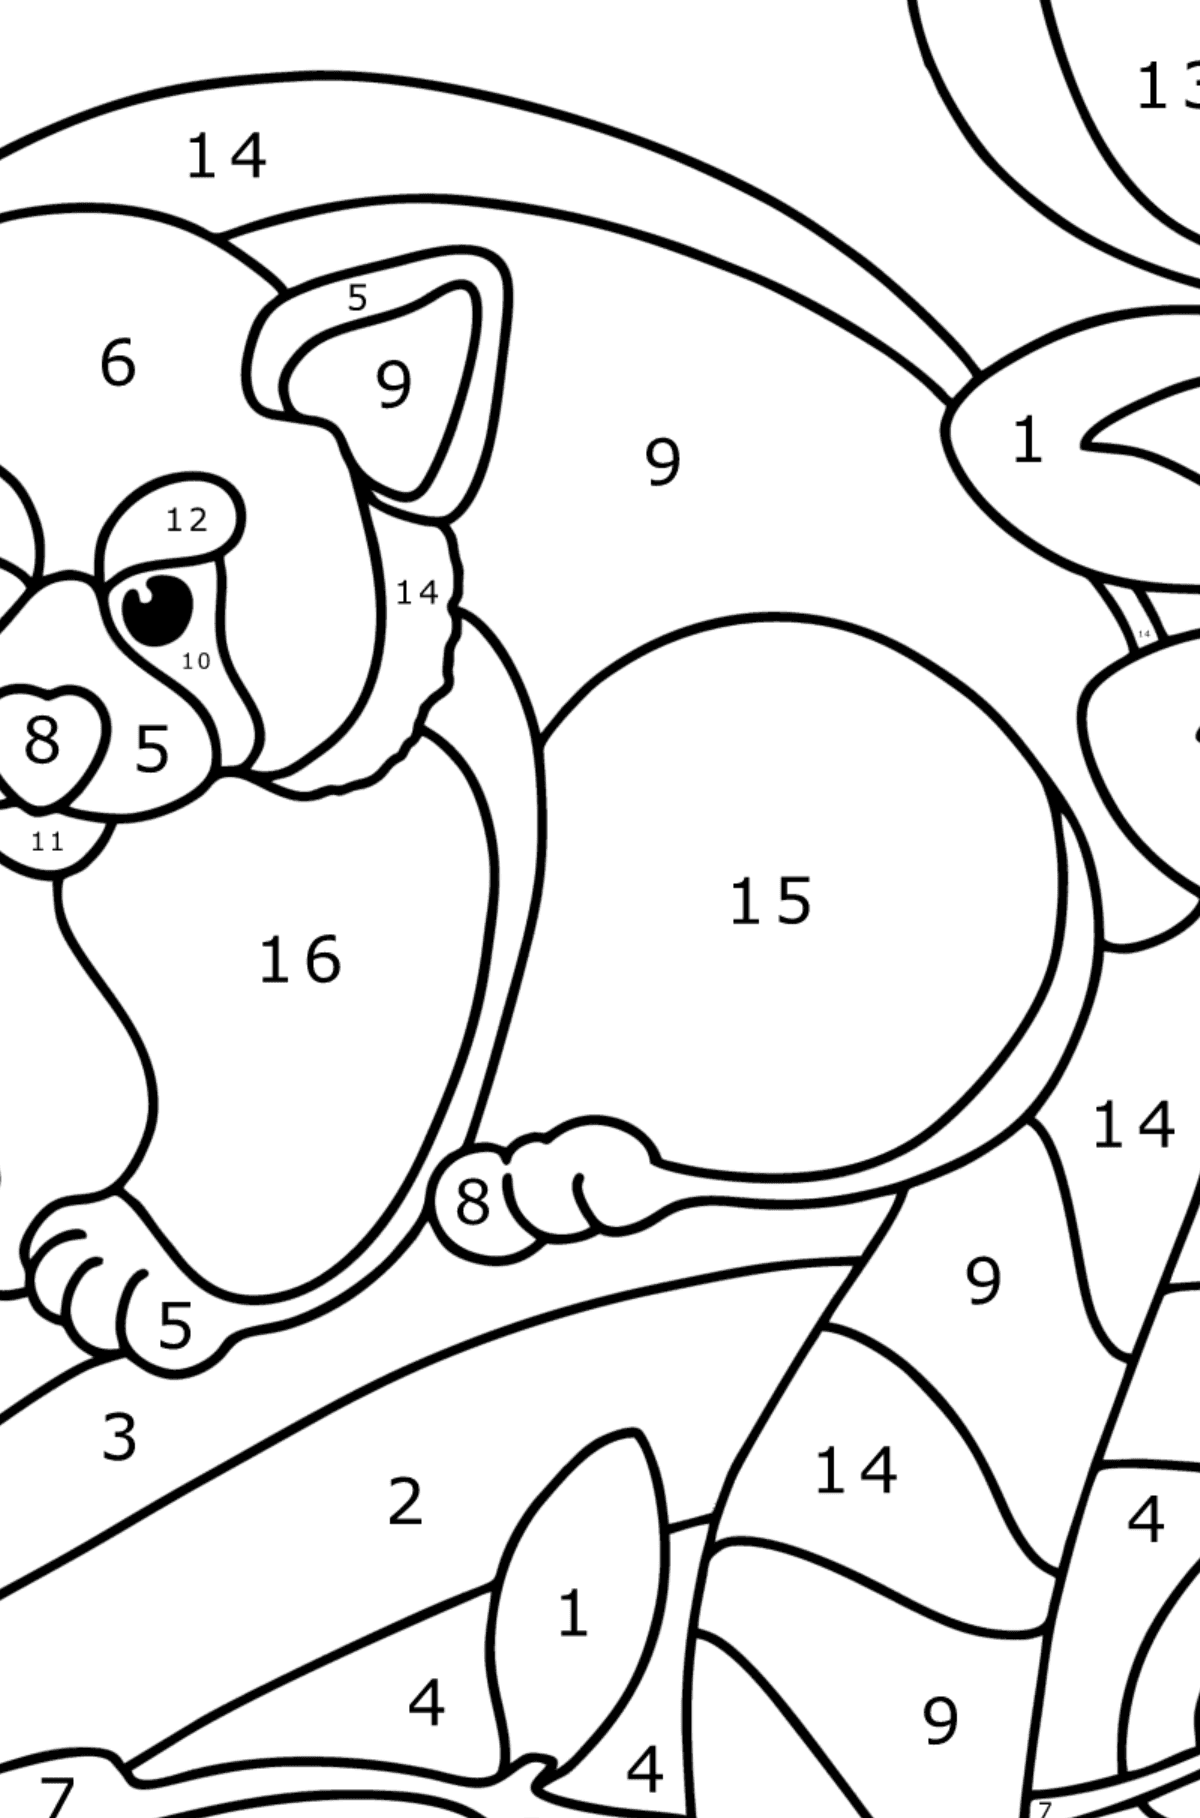 Red panda coloring page - Coloring by Numbers for Kids